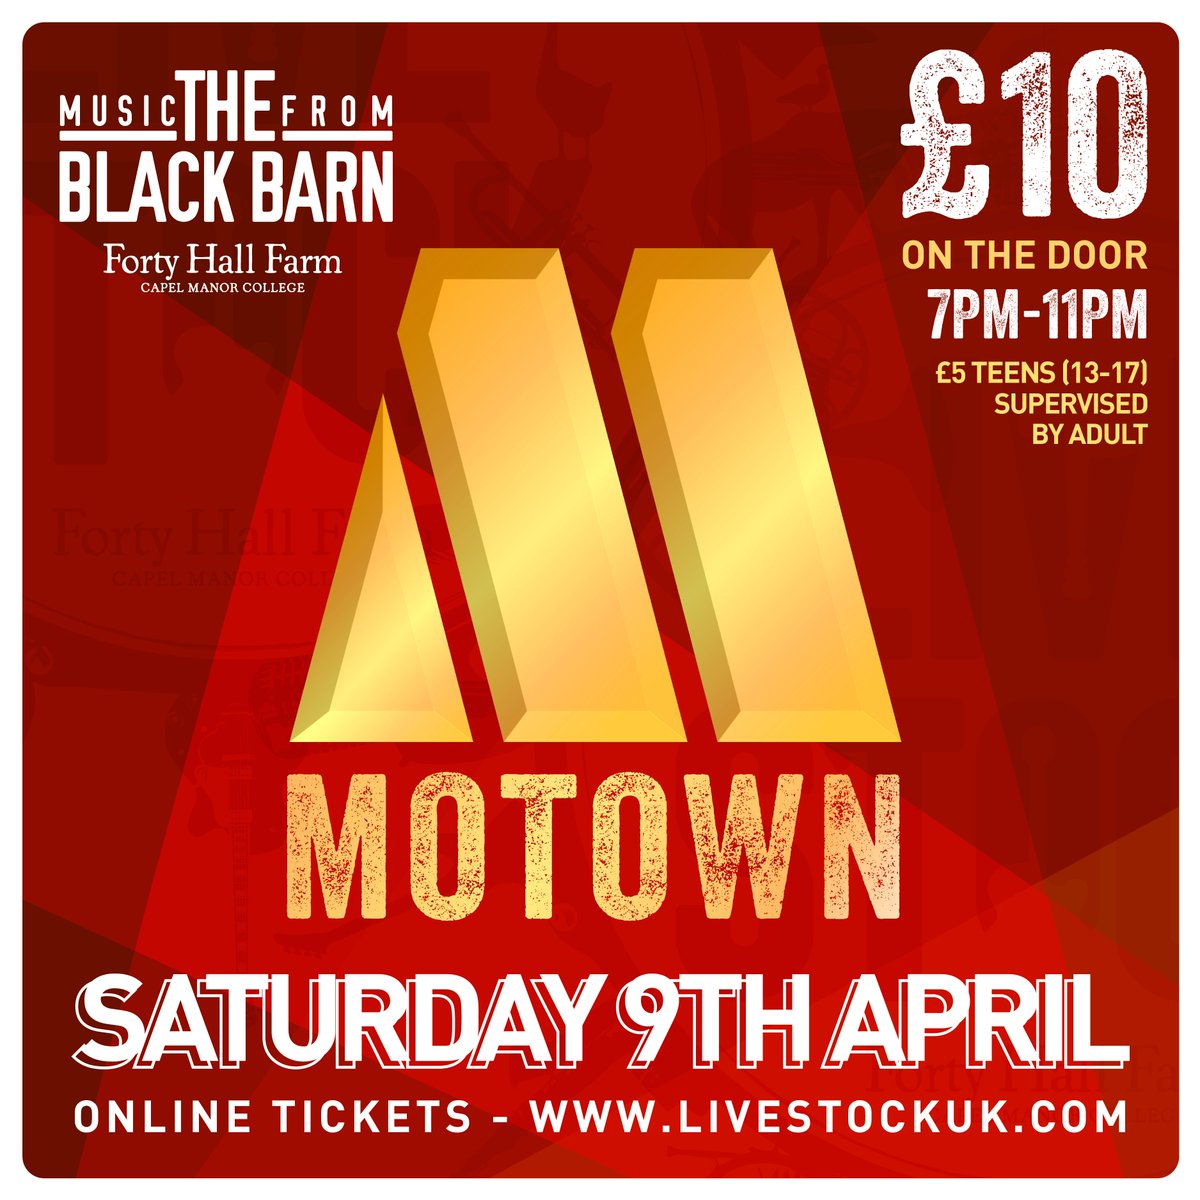 For Music from The Black Barn in April, we will send you dancing into summer with the fantastic Motown Band. If you were at our first show out of lockdown or the Christmas party in 2019, you know you don't want to miss this. buytickets.at/livestockmusic… #LivetockMusic #TheBlackBarn